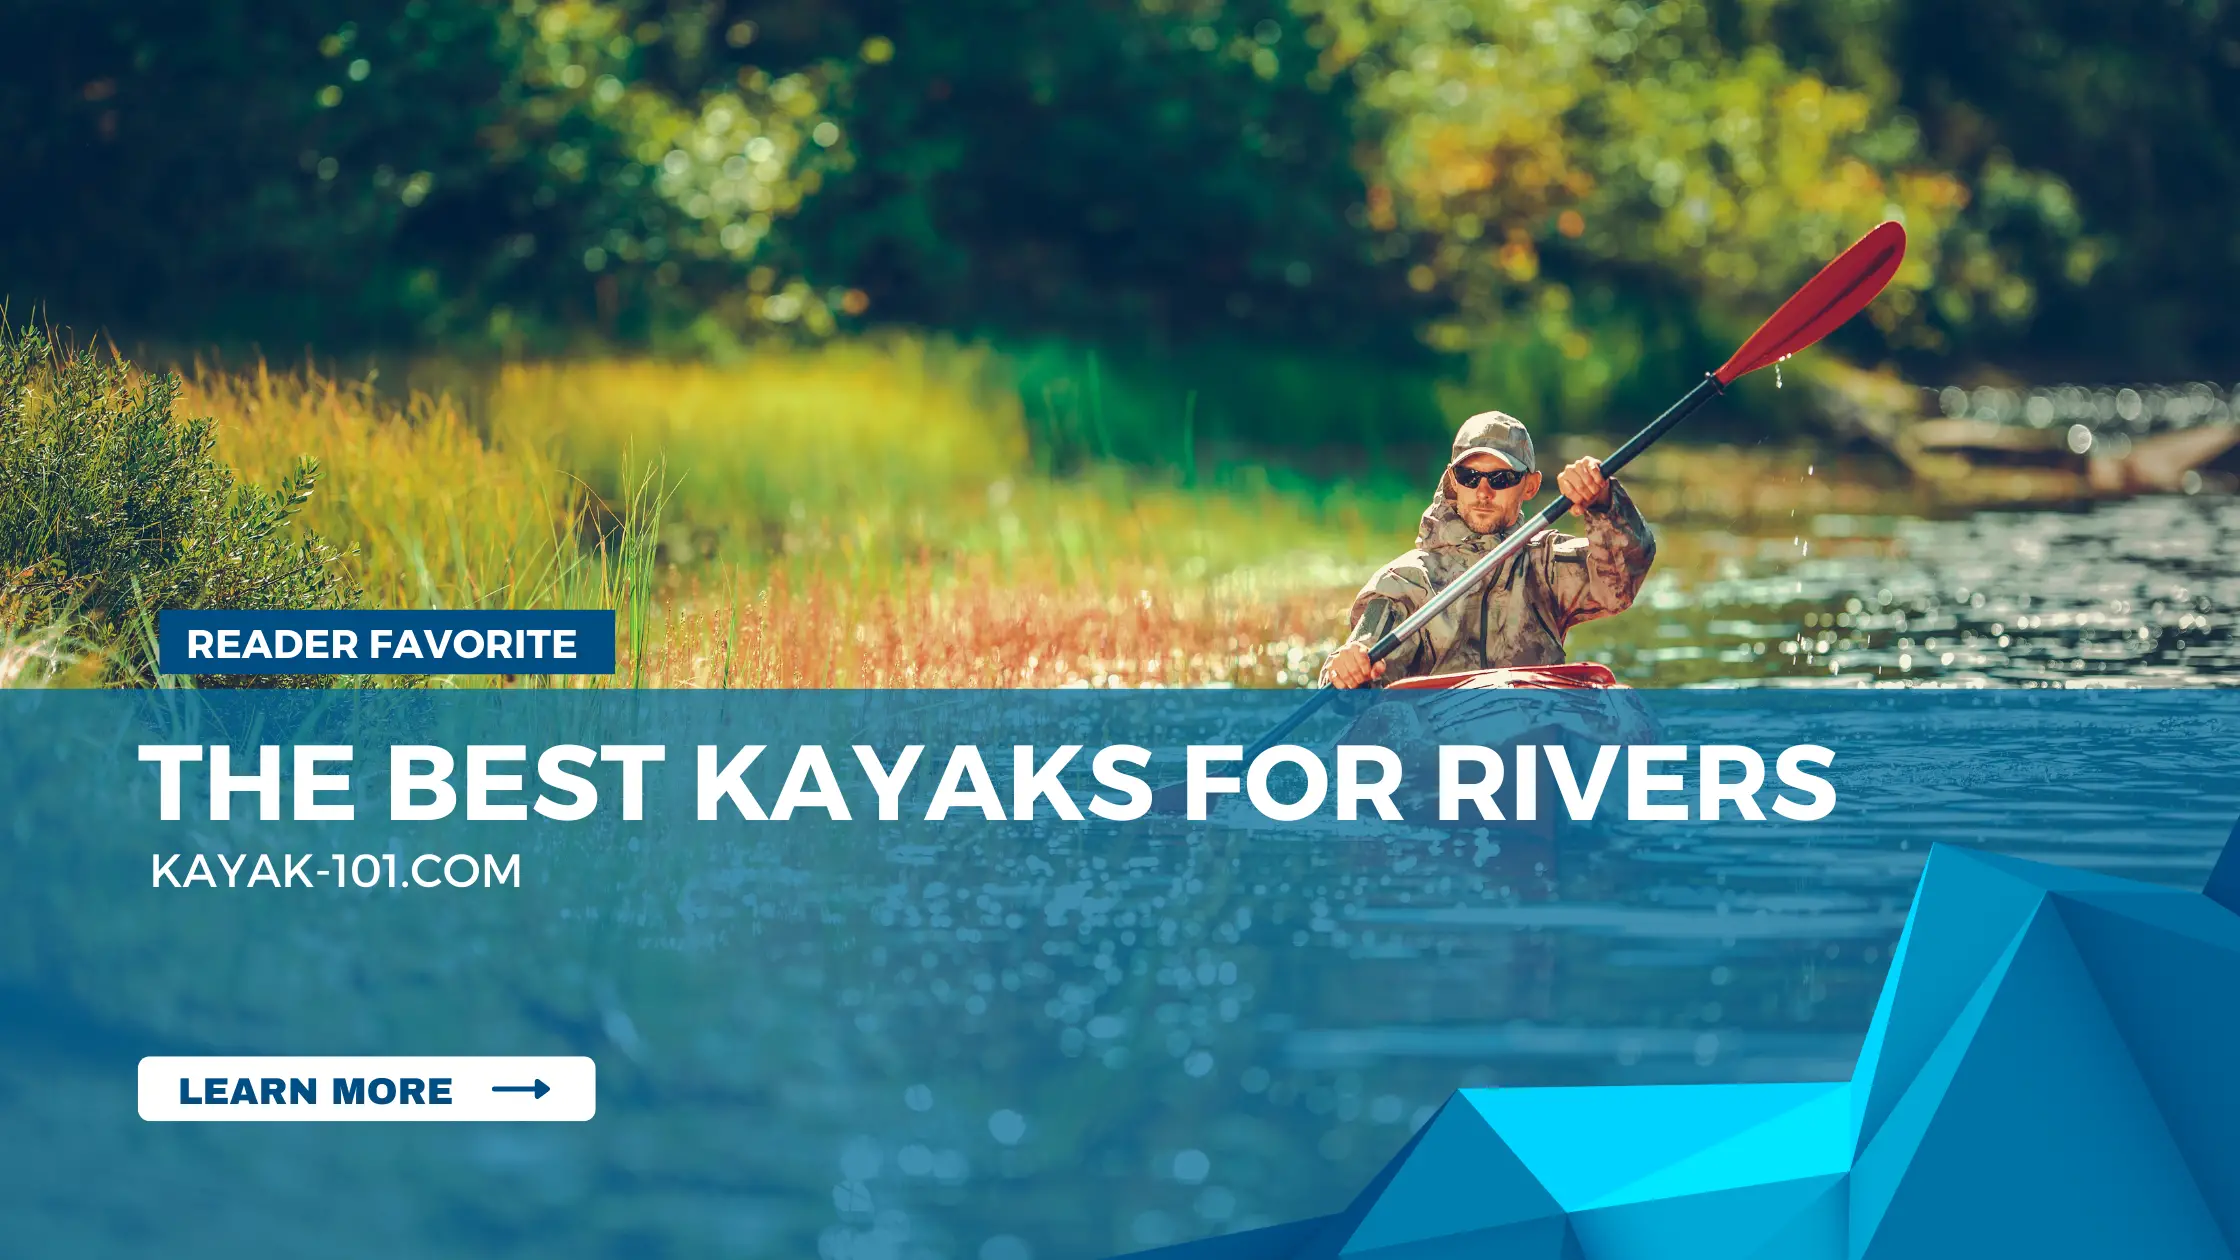 The Best Kayaks for Rivers